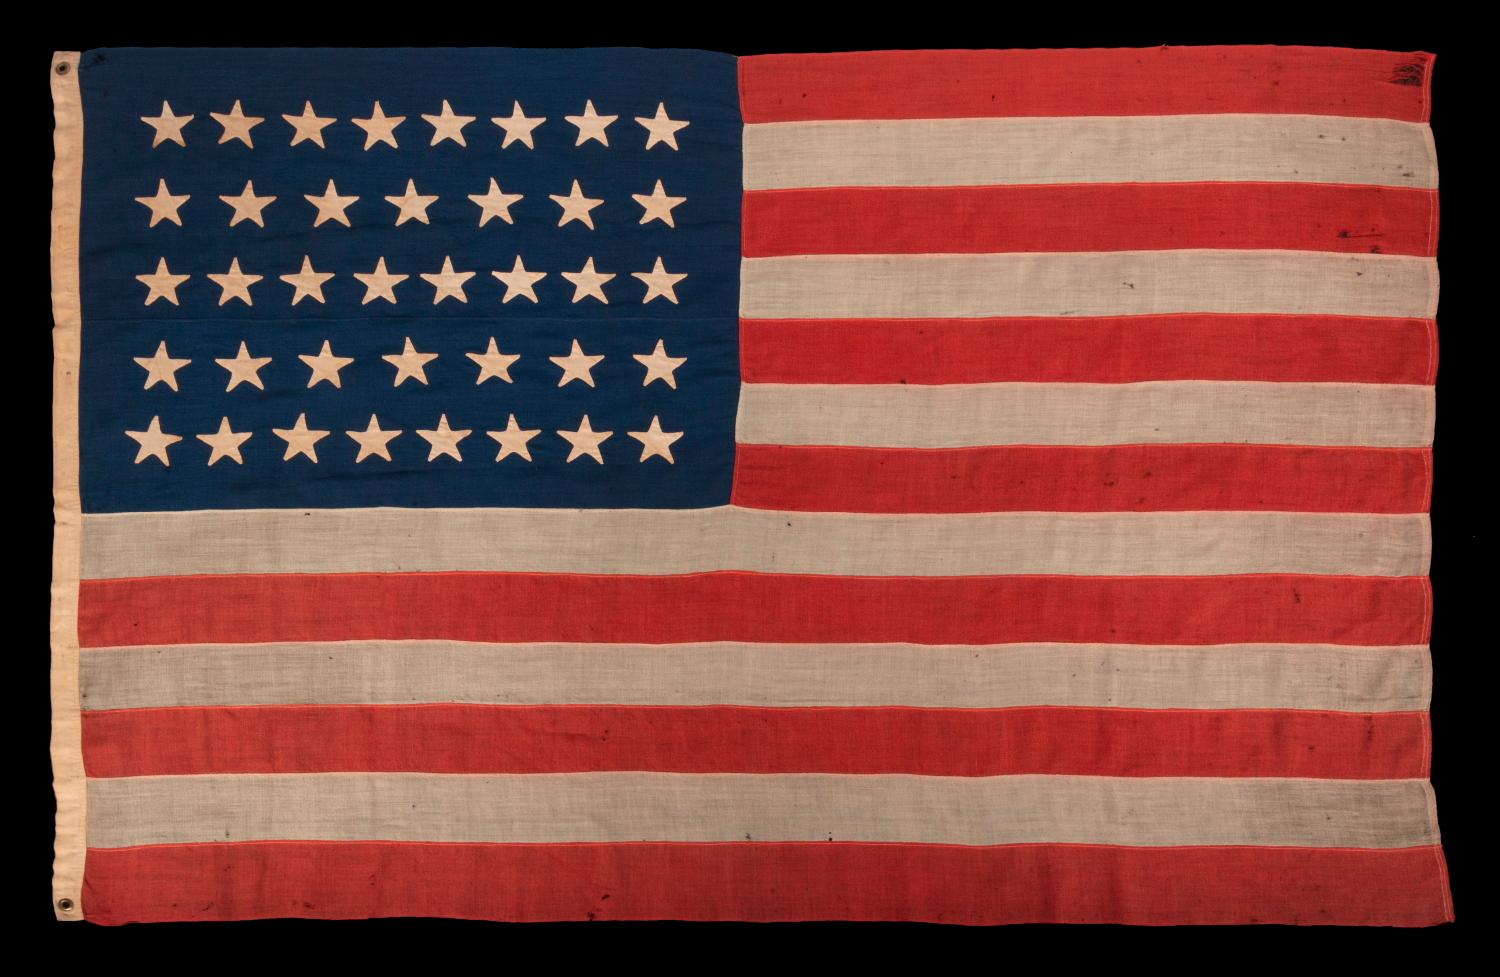 38 Star Antique American Flag with Hand-sewn Stars in an 8-7-8-7-8 Pattern of Justified Rows, Made in the Period When Colorado was the Most Recent State to Join The Union, 1876-1889:

38 star American national flag, with pencil-inscribed names of